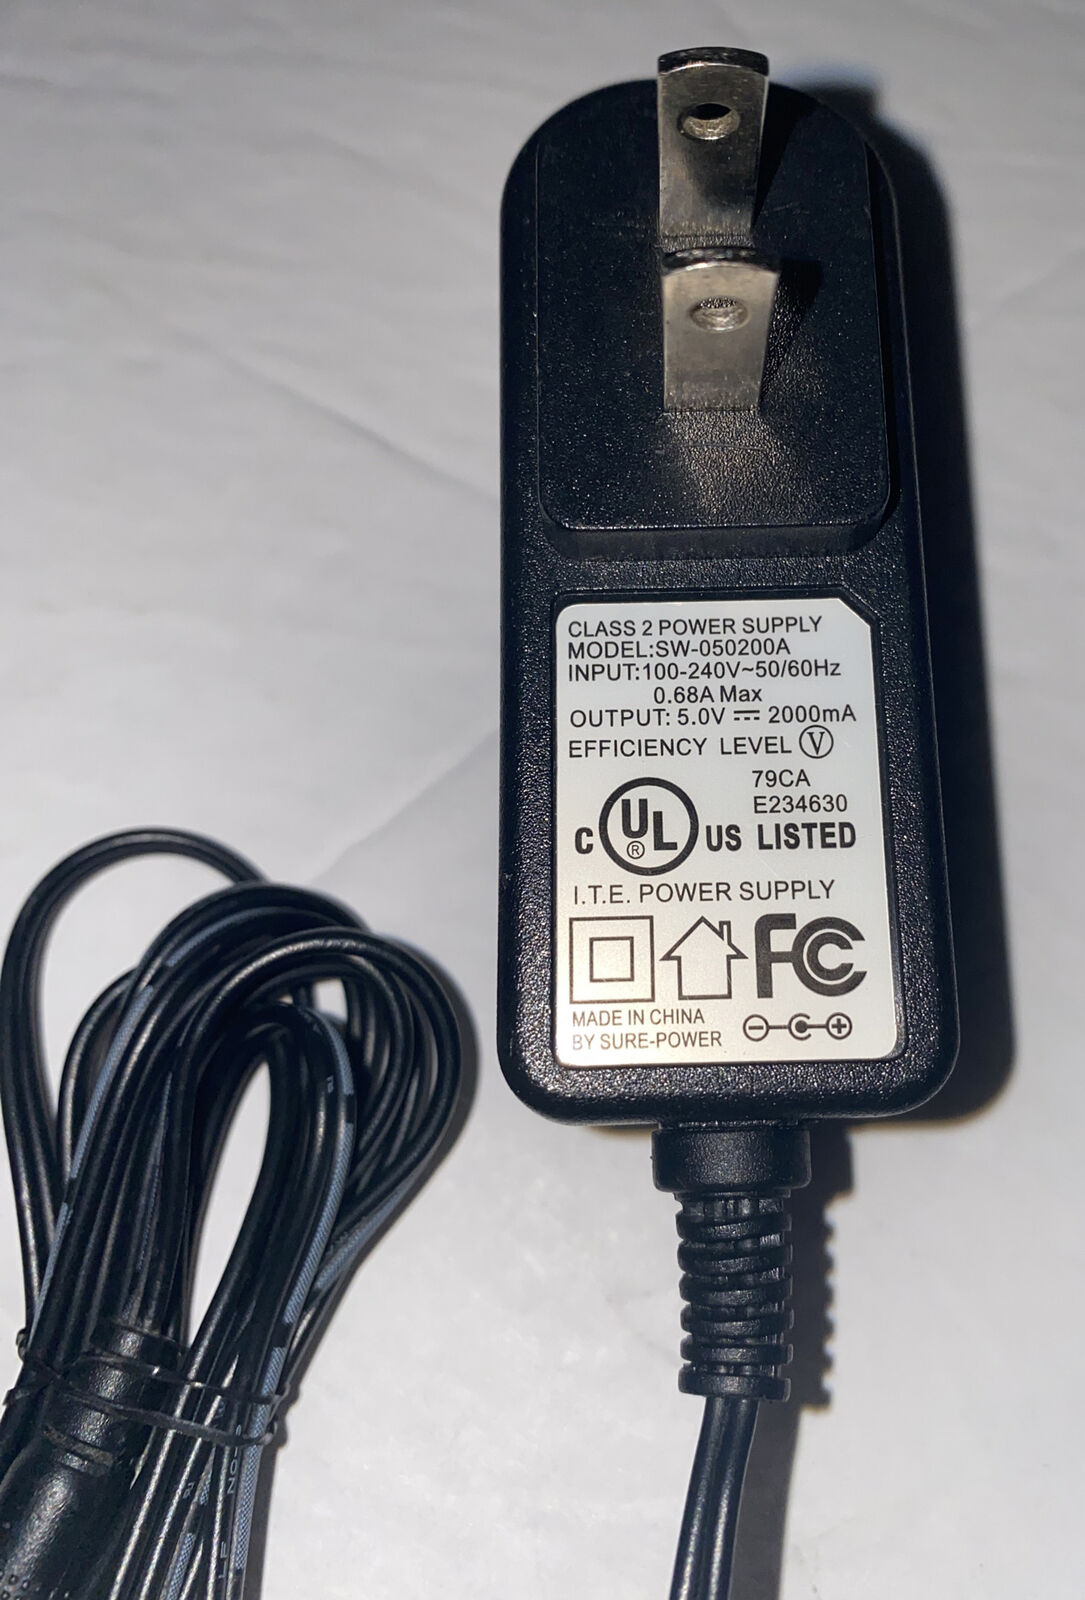 Nabi Class 2 Wall Charger AC Adapter Switching Power Supply SW-050200A 5V 2A 10W Brand: Class 2 power supply I.T.E T